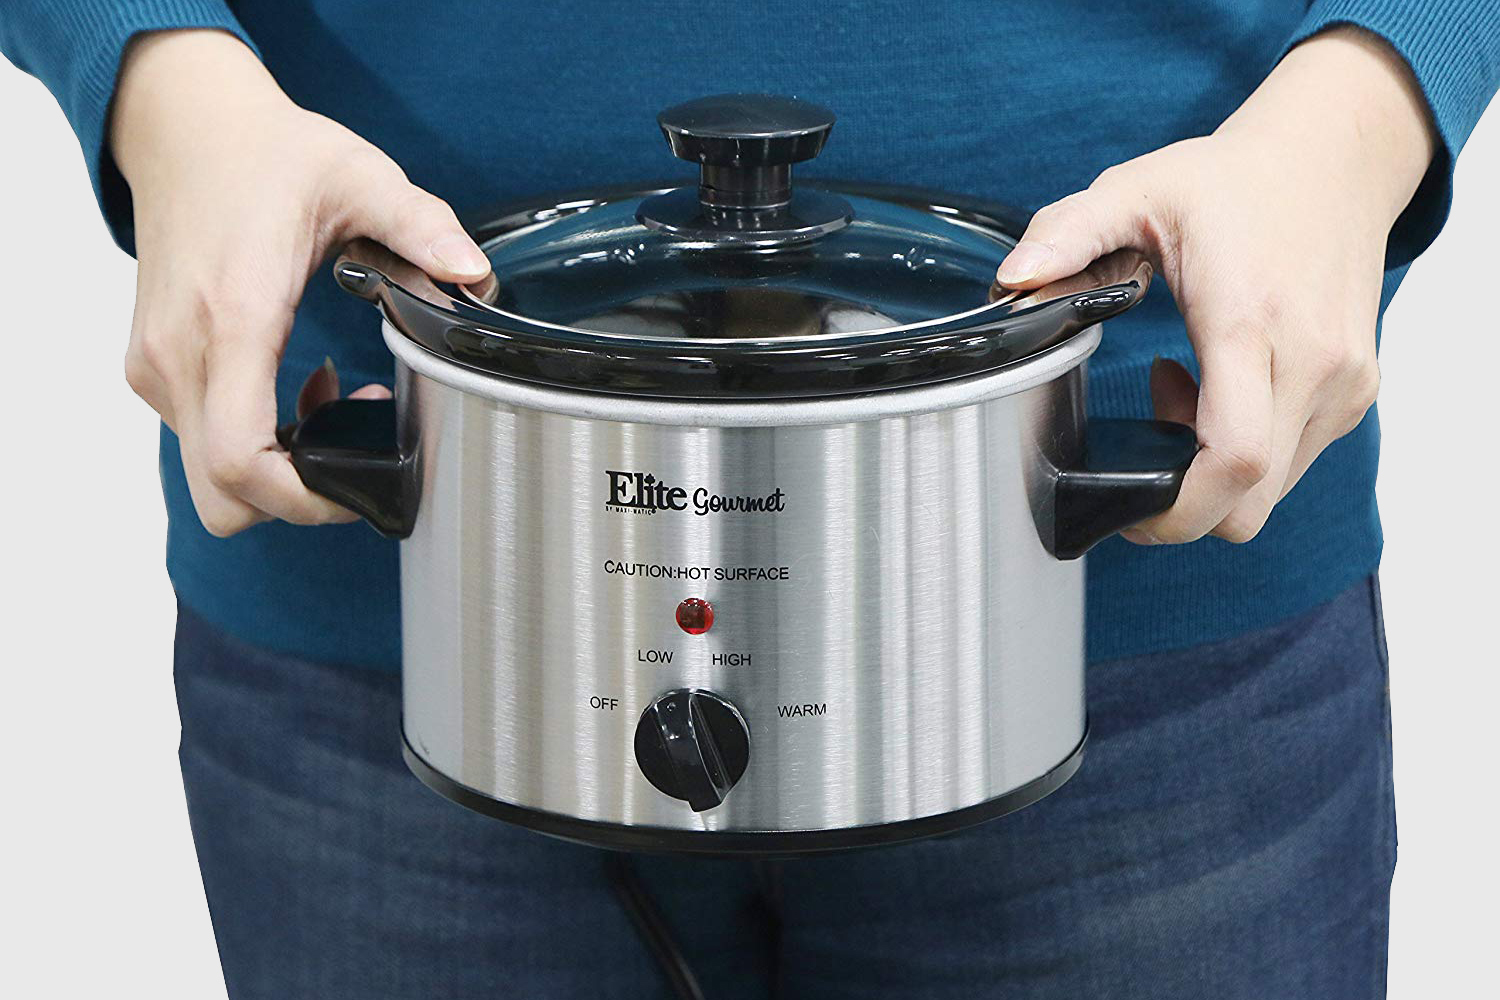 The Presto Nomad Slow Cooker - The Amazing Slow Cooker That's